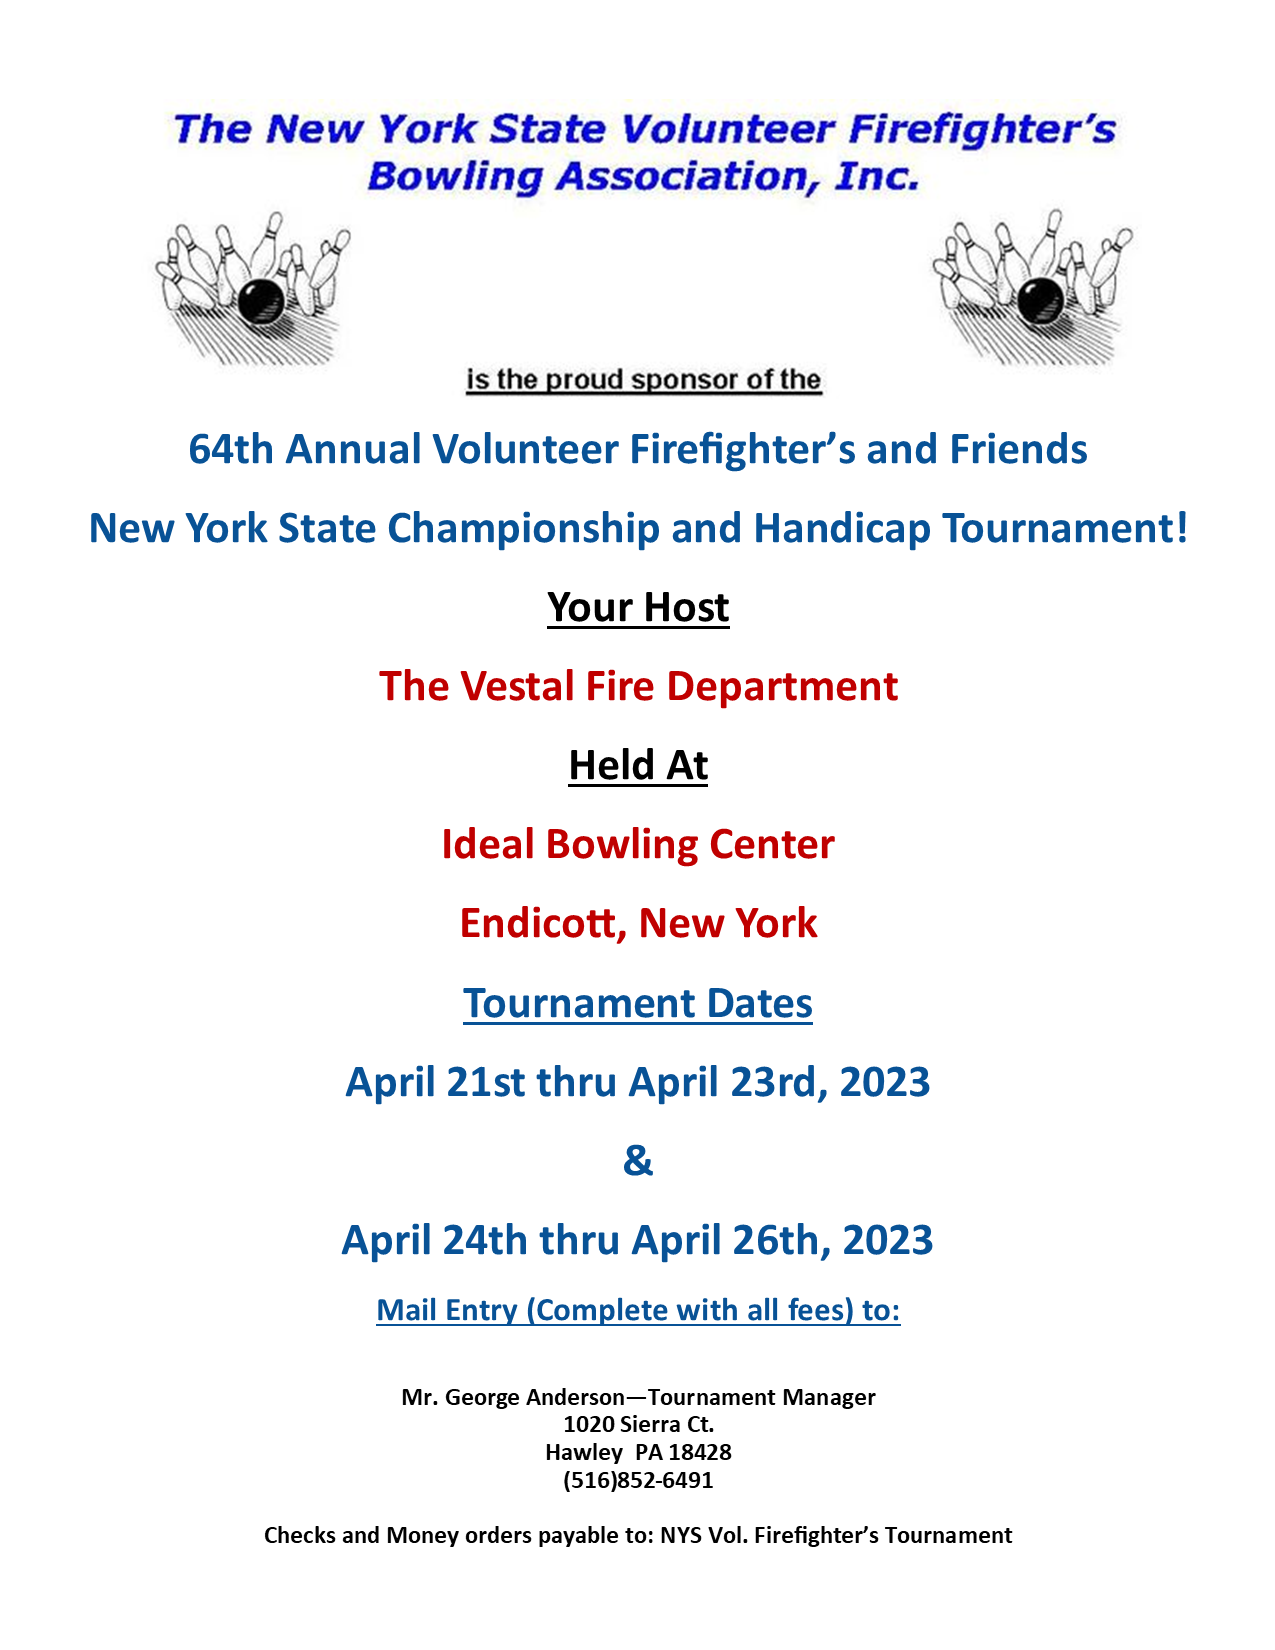 64<sup>th</sup> Annual Volunteer Firefighter's & Friends Bowling Tournament